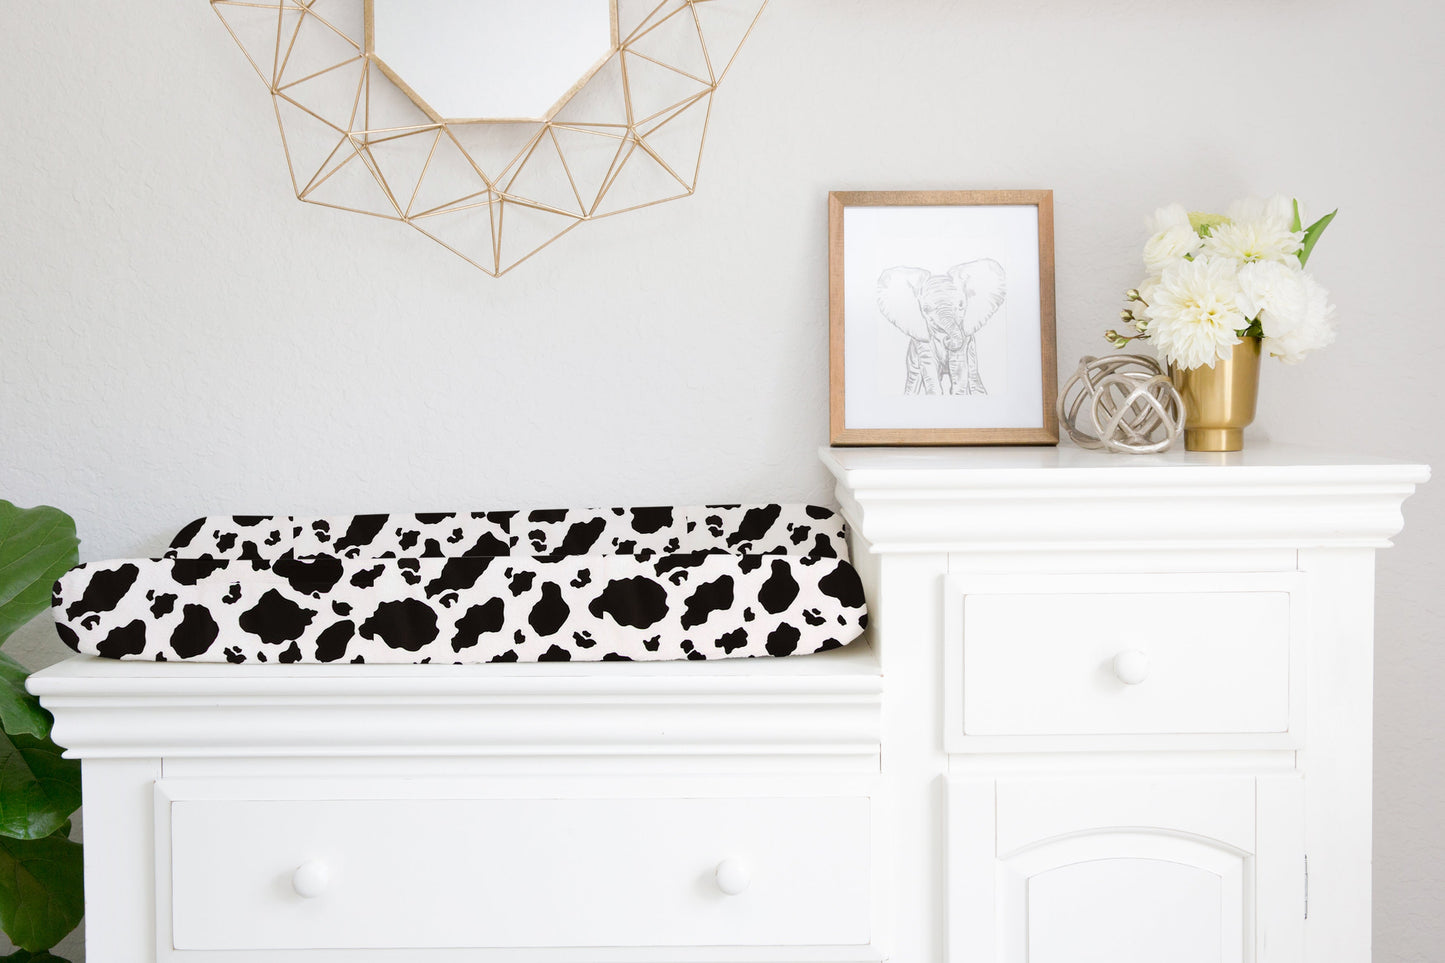 cow print changing pad cover available in 5-piece sets or upon request by itself.